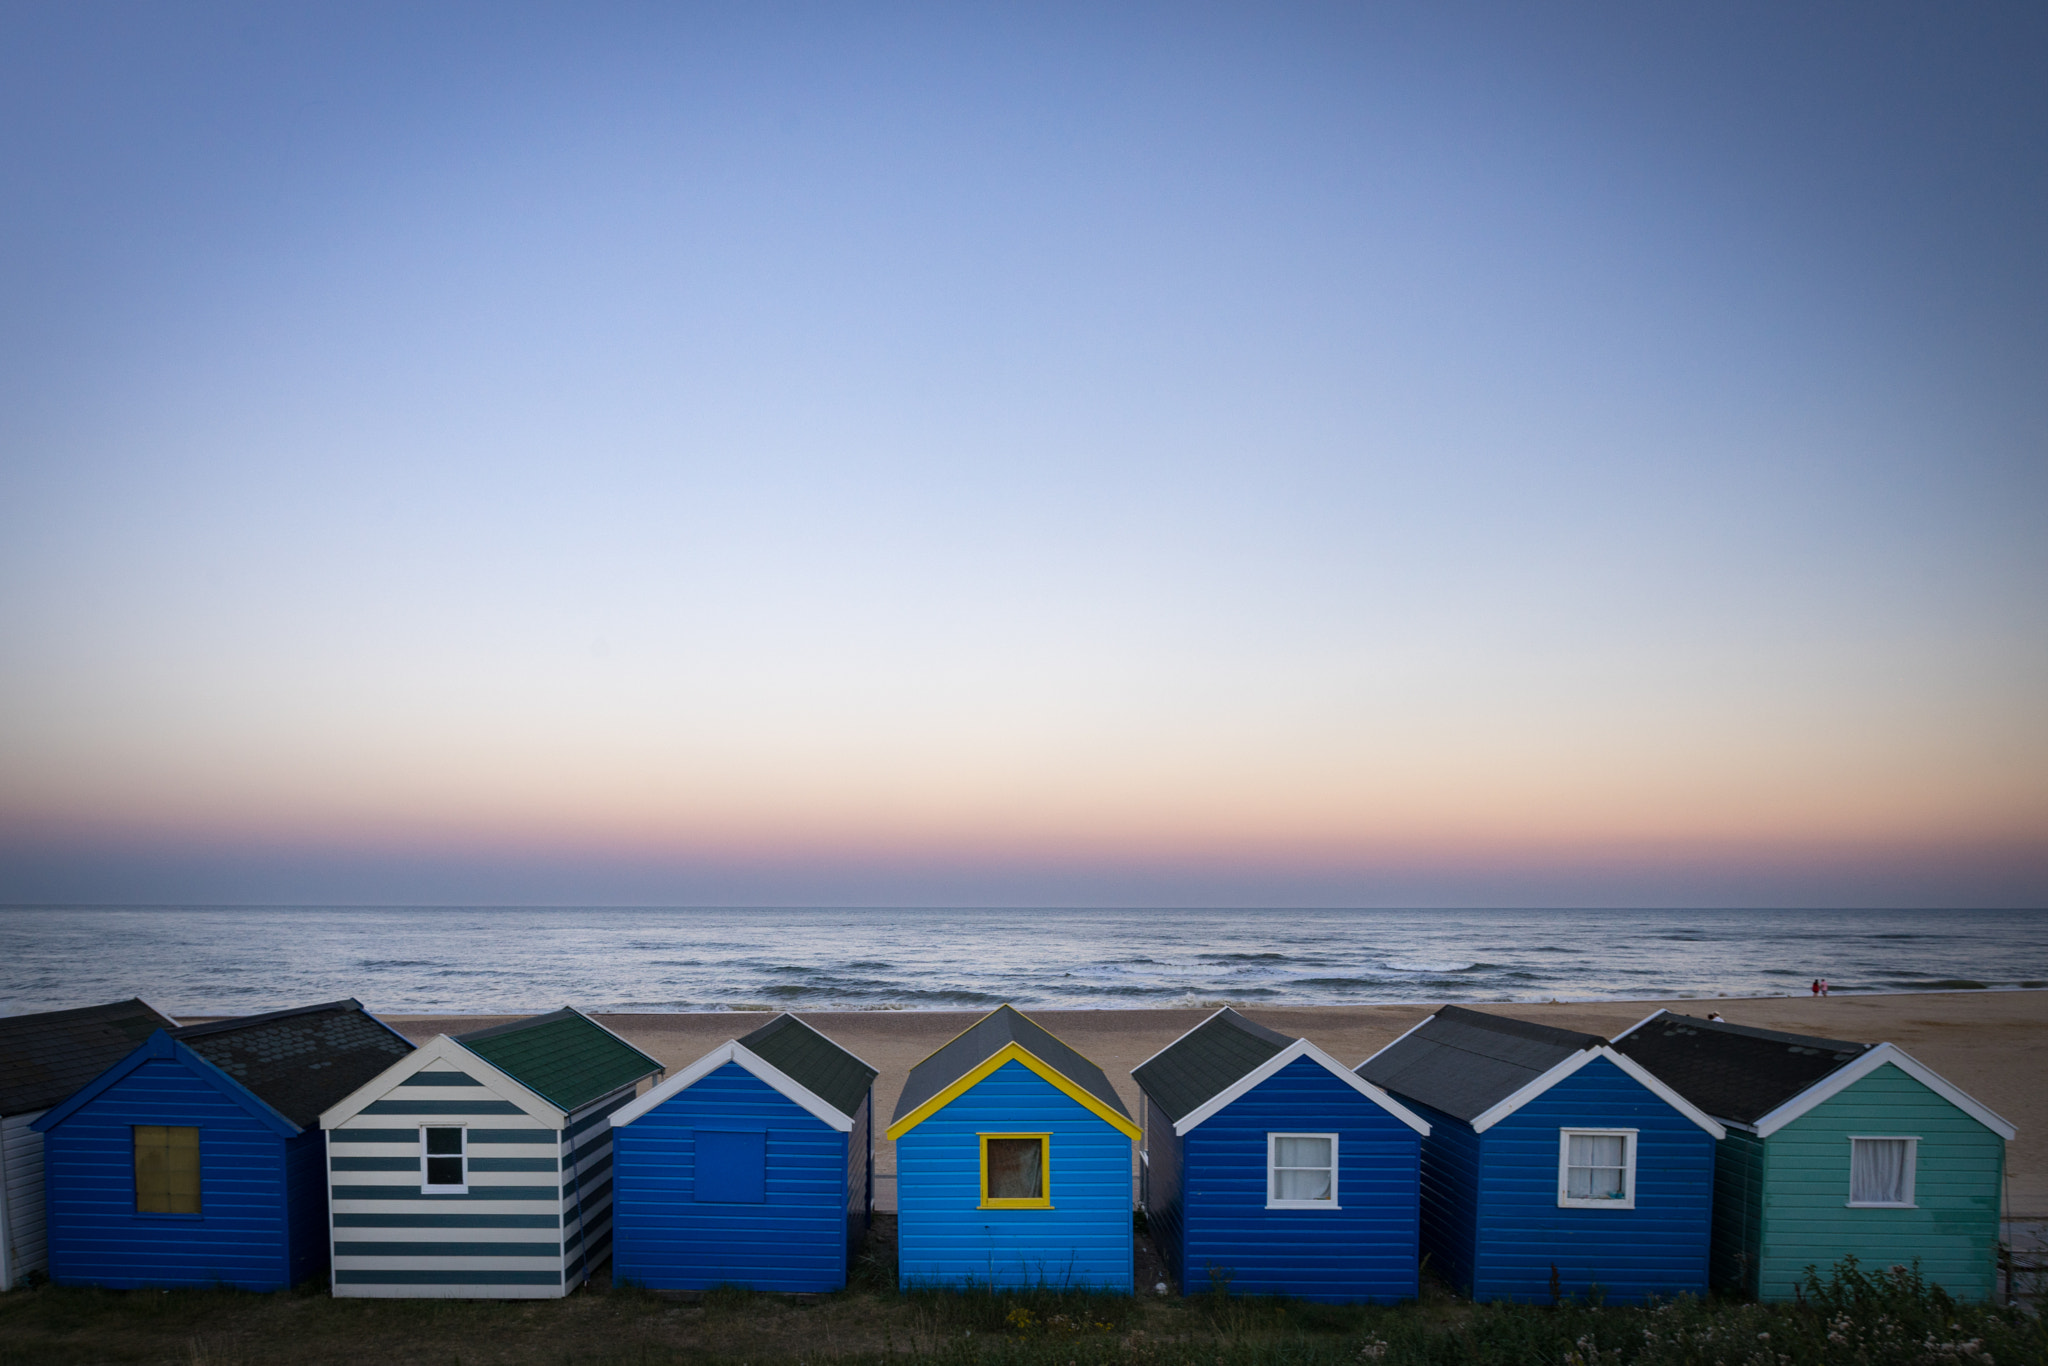 Sony a7 sample photo. Southwold beach huts at dusk photography